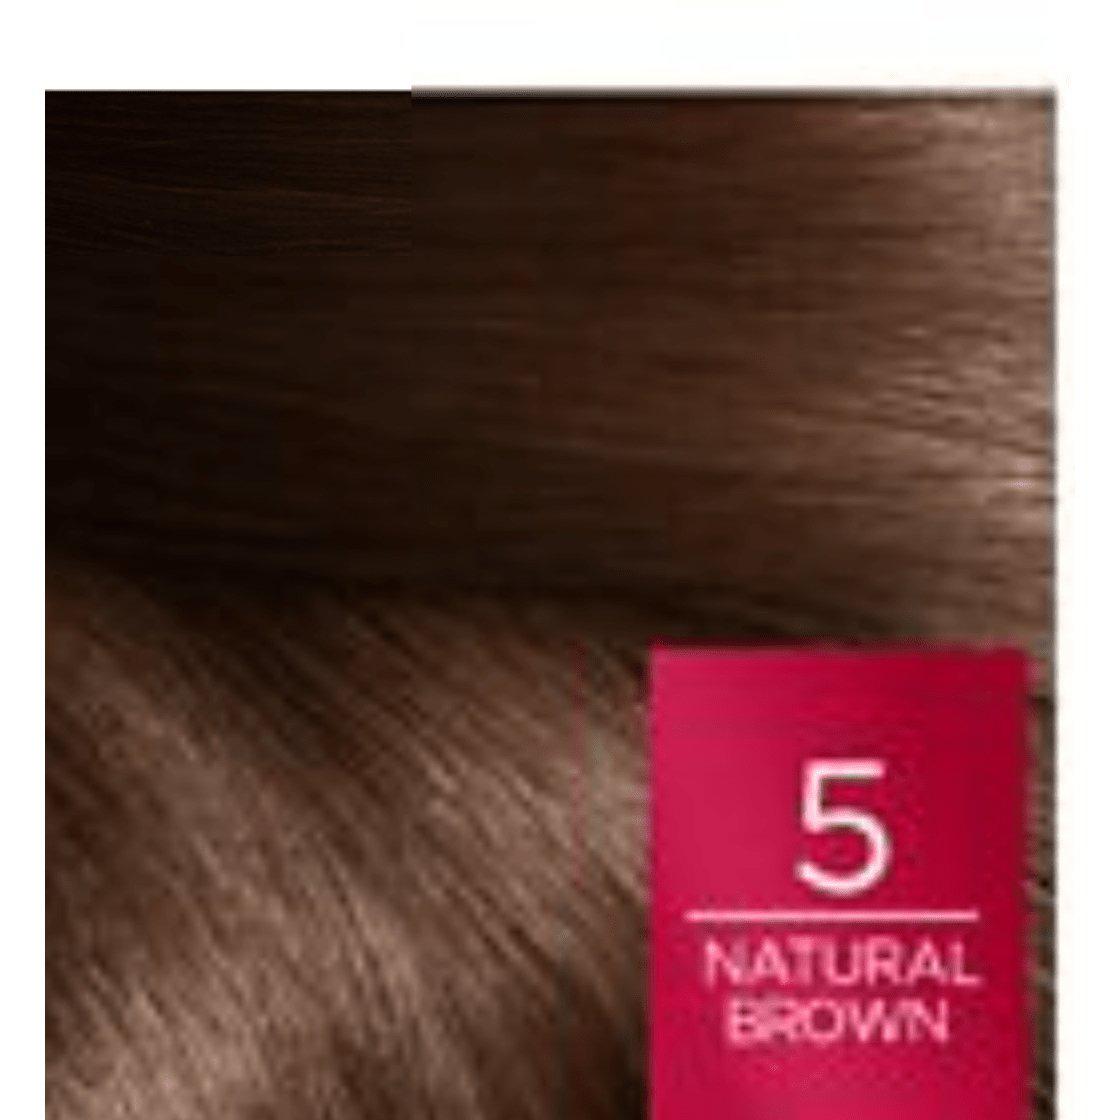 L'oreal Excellence Crème Permanent Hair Dye - Triple Care - Natural Brown 5 - Healthxpress.ie